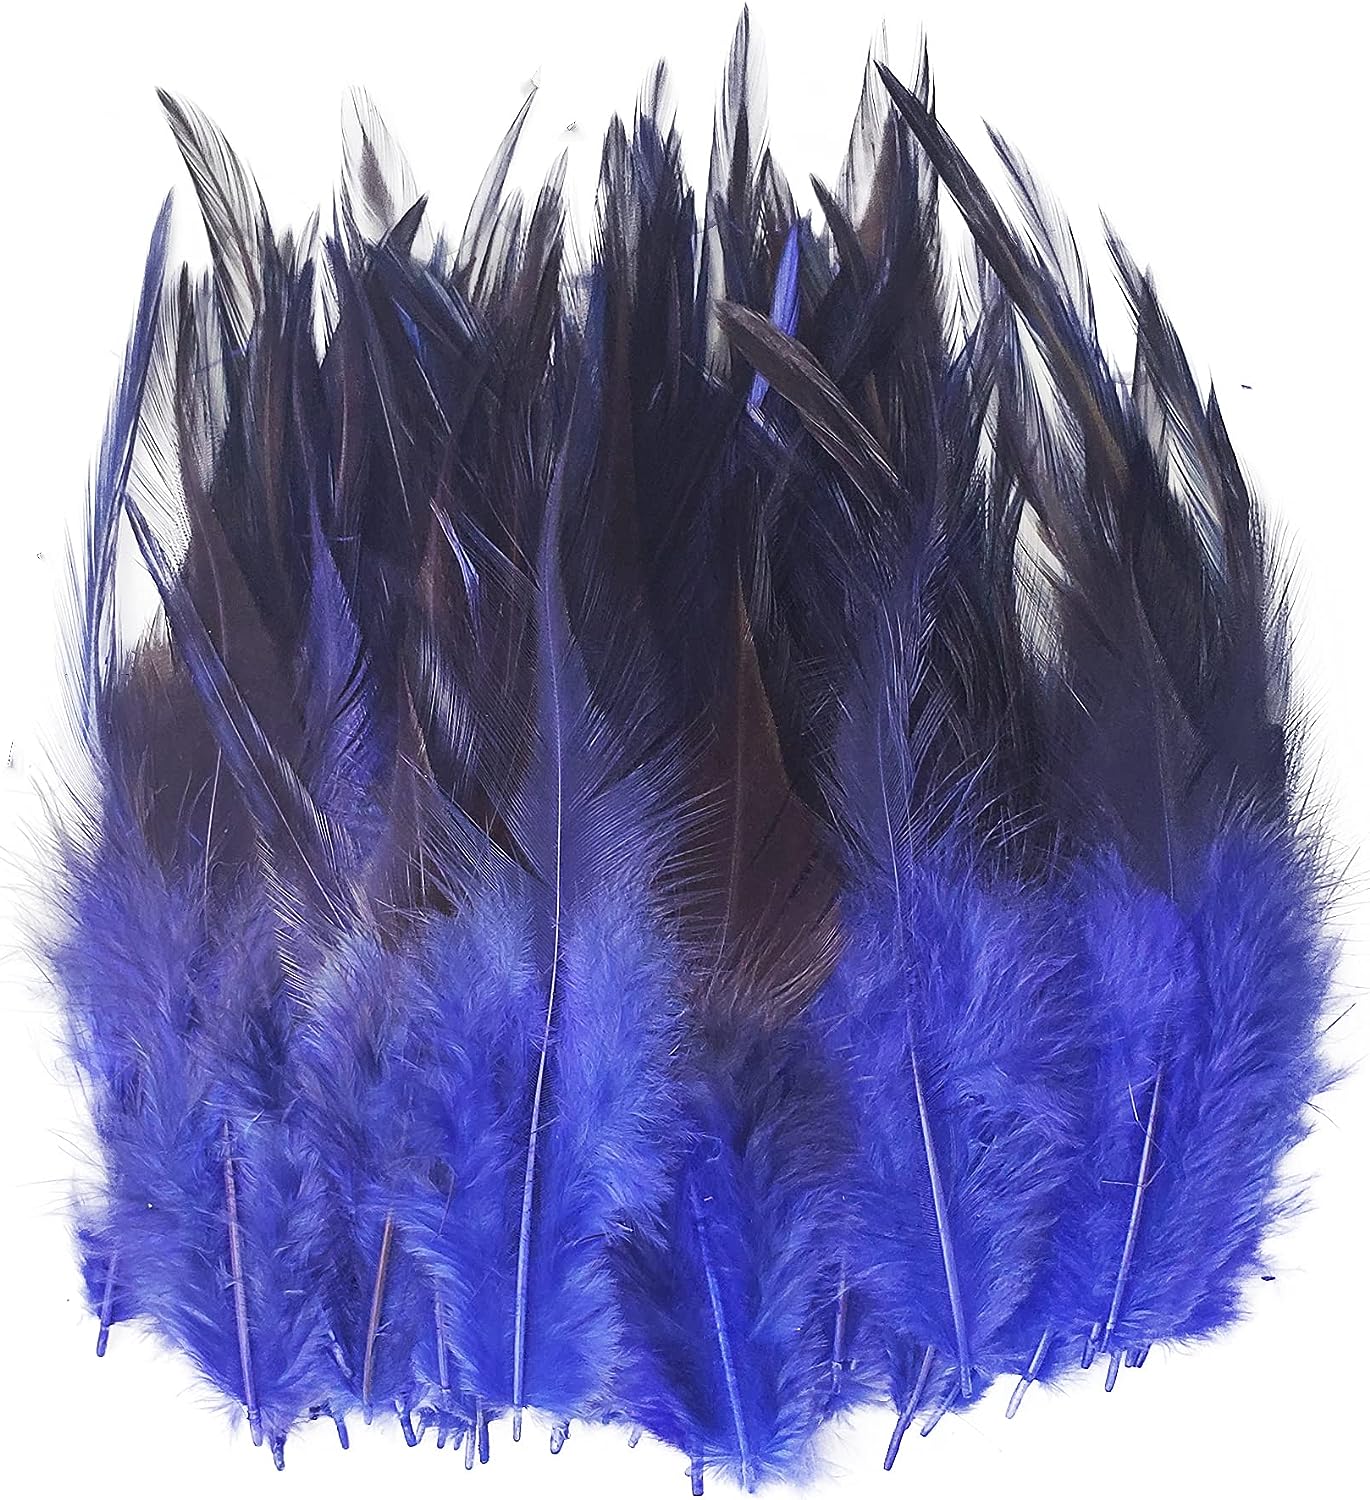 Rooster Saddle Hackle Feathers Bulk 300PCS Colorful Craft Feathers 4-6Inch  Pheasant Neck Feather for Pendant Earrings Dream Catchers DIY Wedding Party